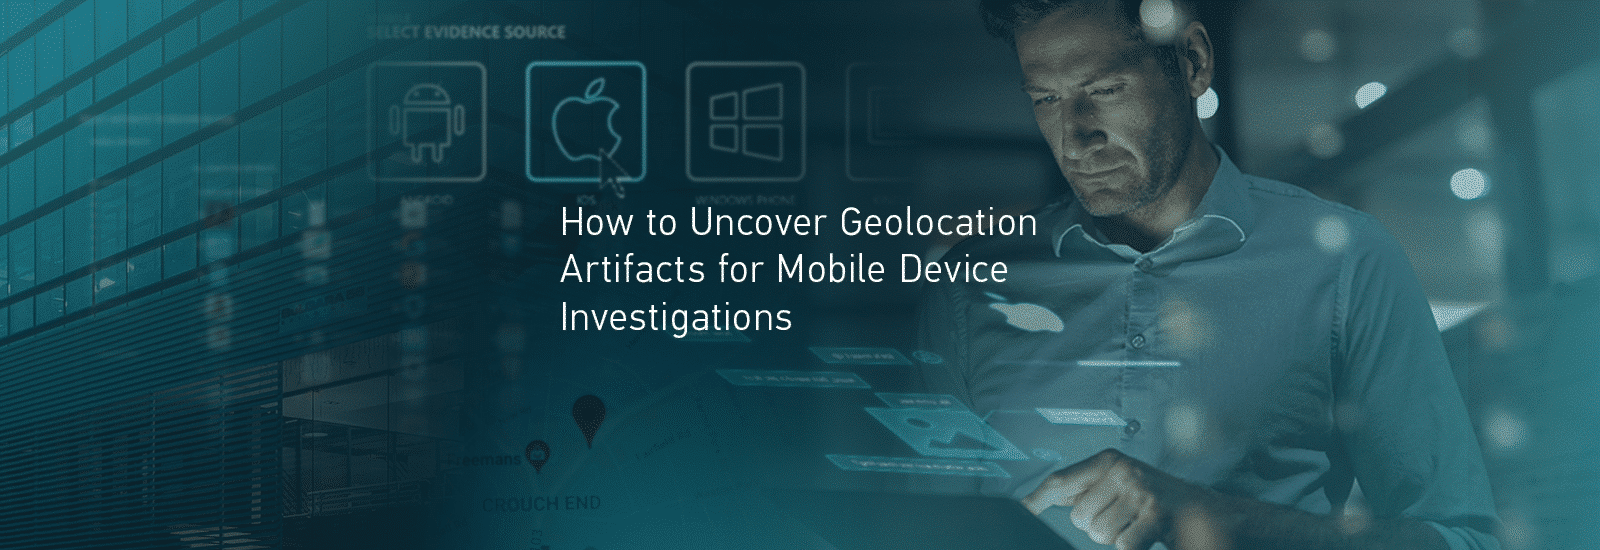 A decorative header for the blog: "How to Uncover Geolocation Artifacts for Mobile Device Investigations"